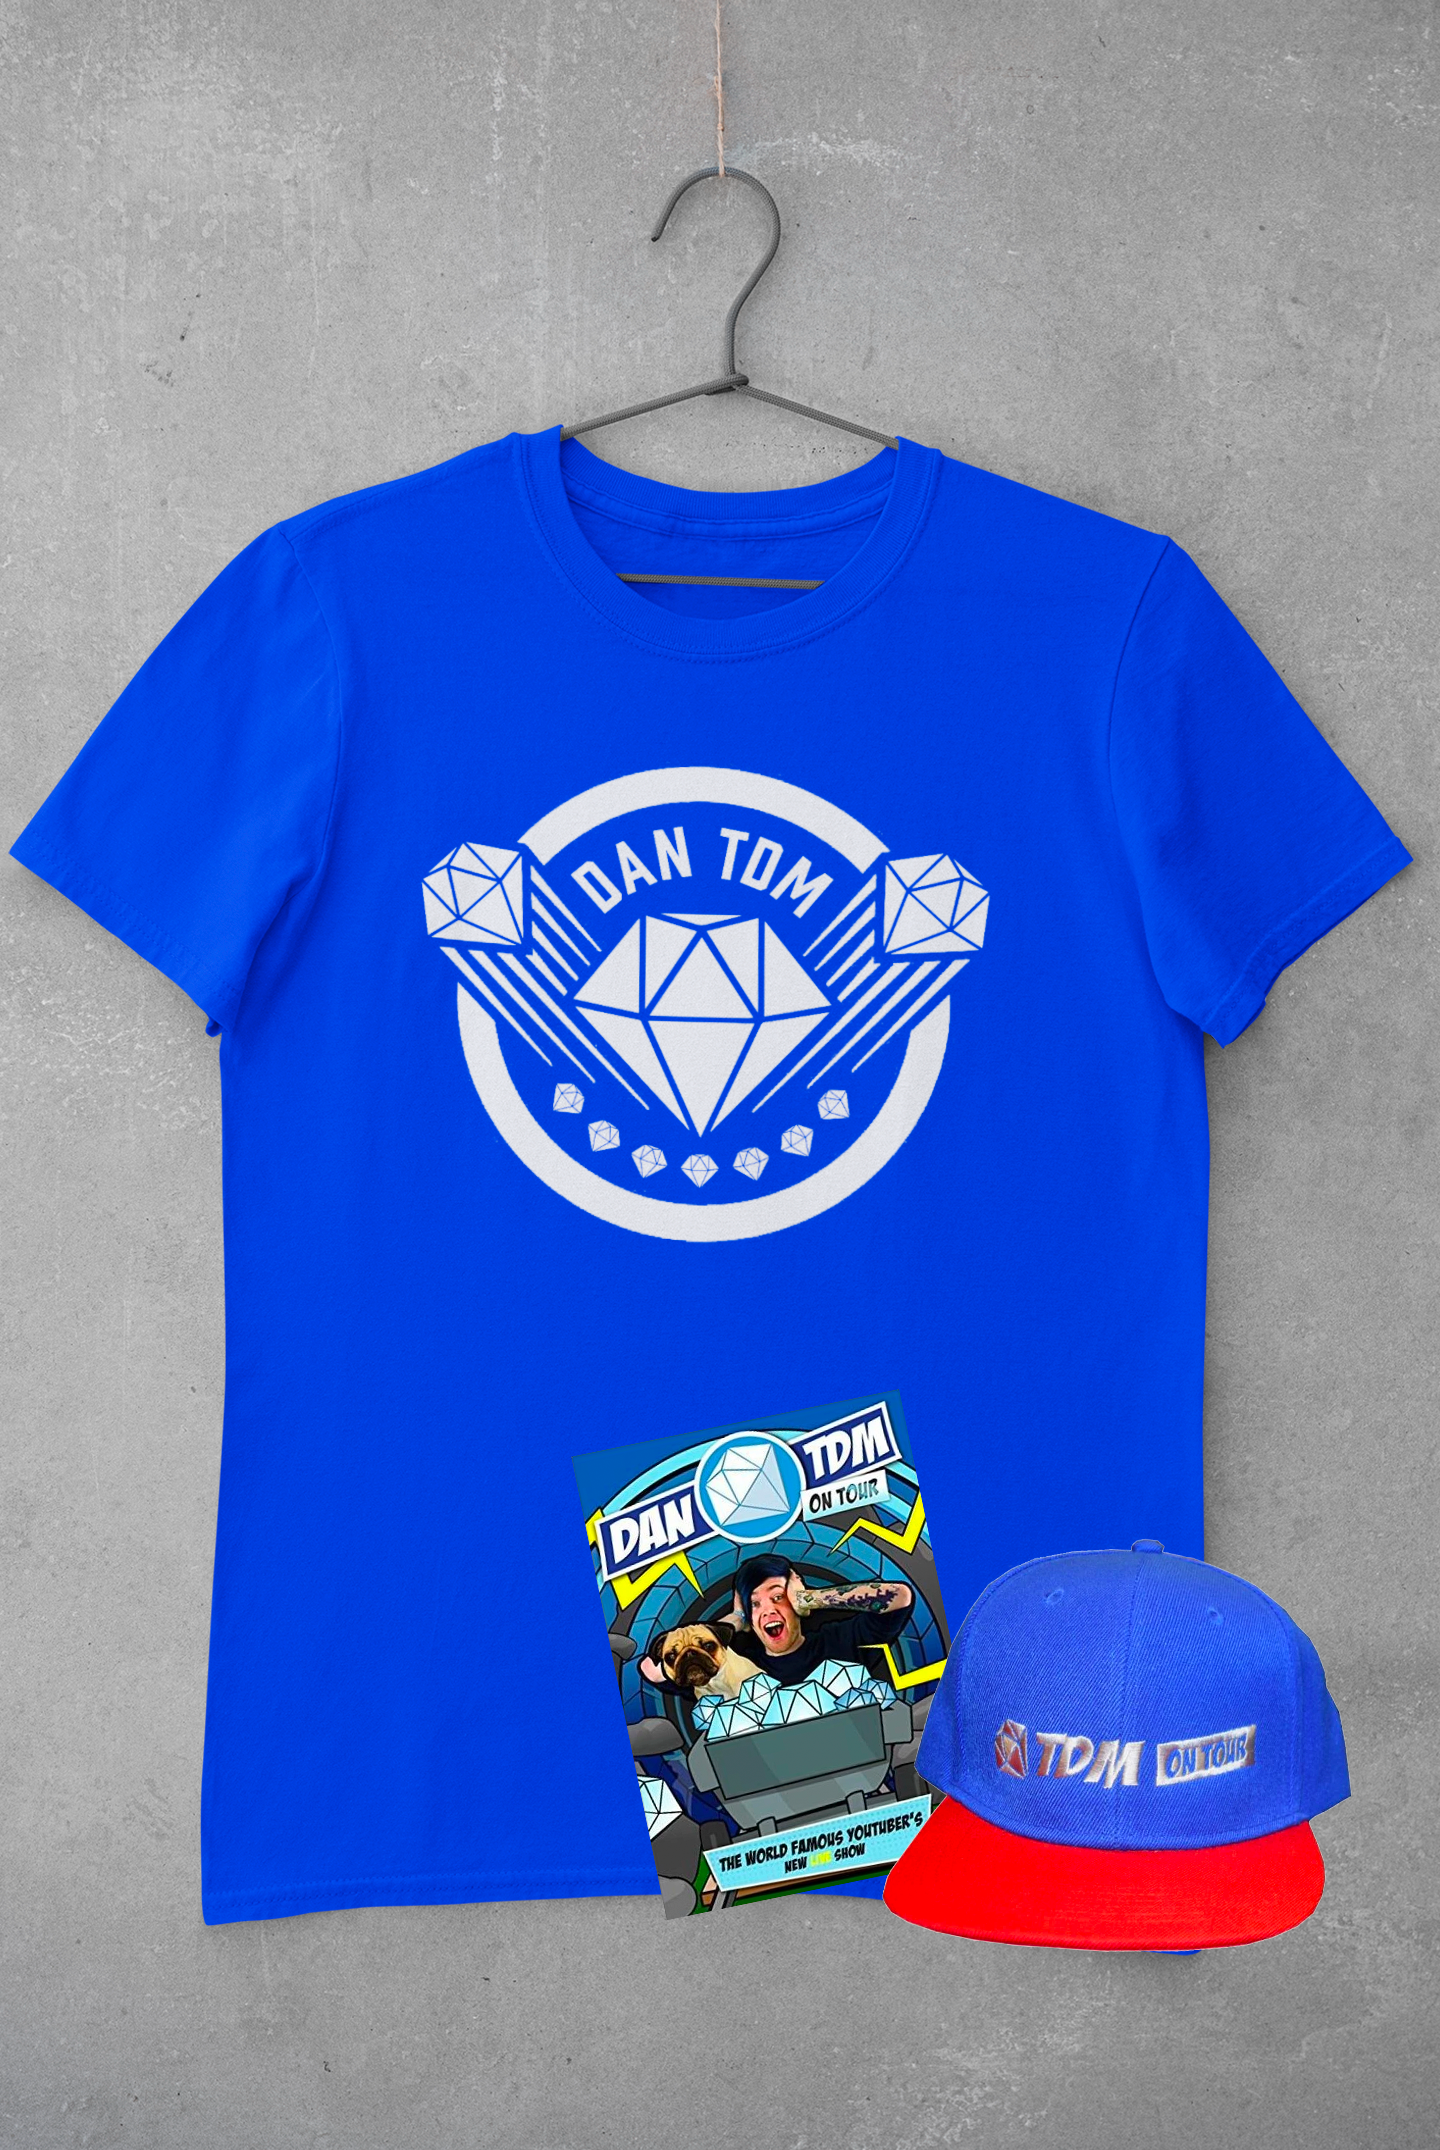 Dan TDM Diamonds Legacy Short Sleeve T-Shirt  PLUS Free Cap and DVD with Purchase